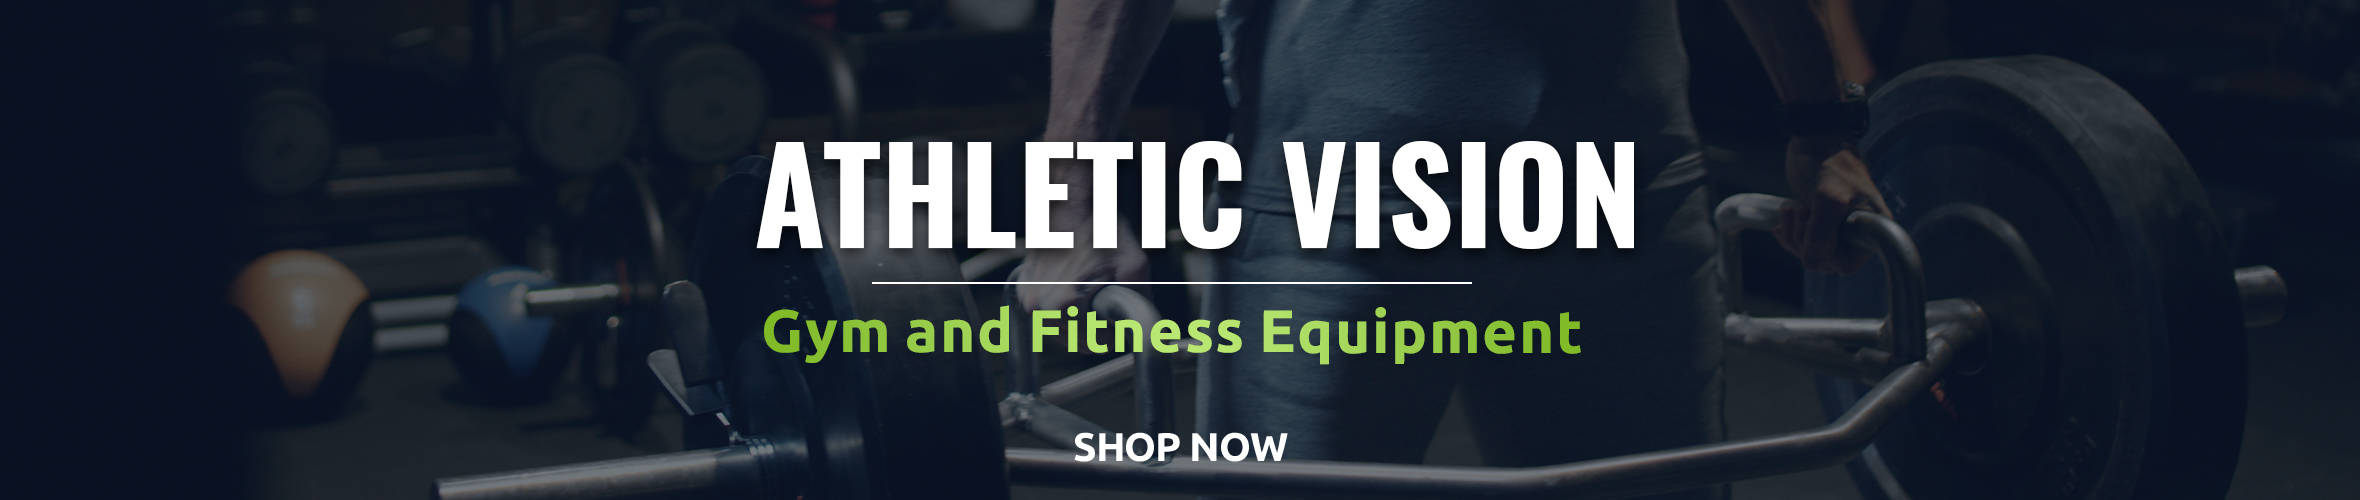 Athletic Vision